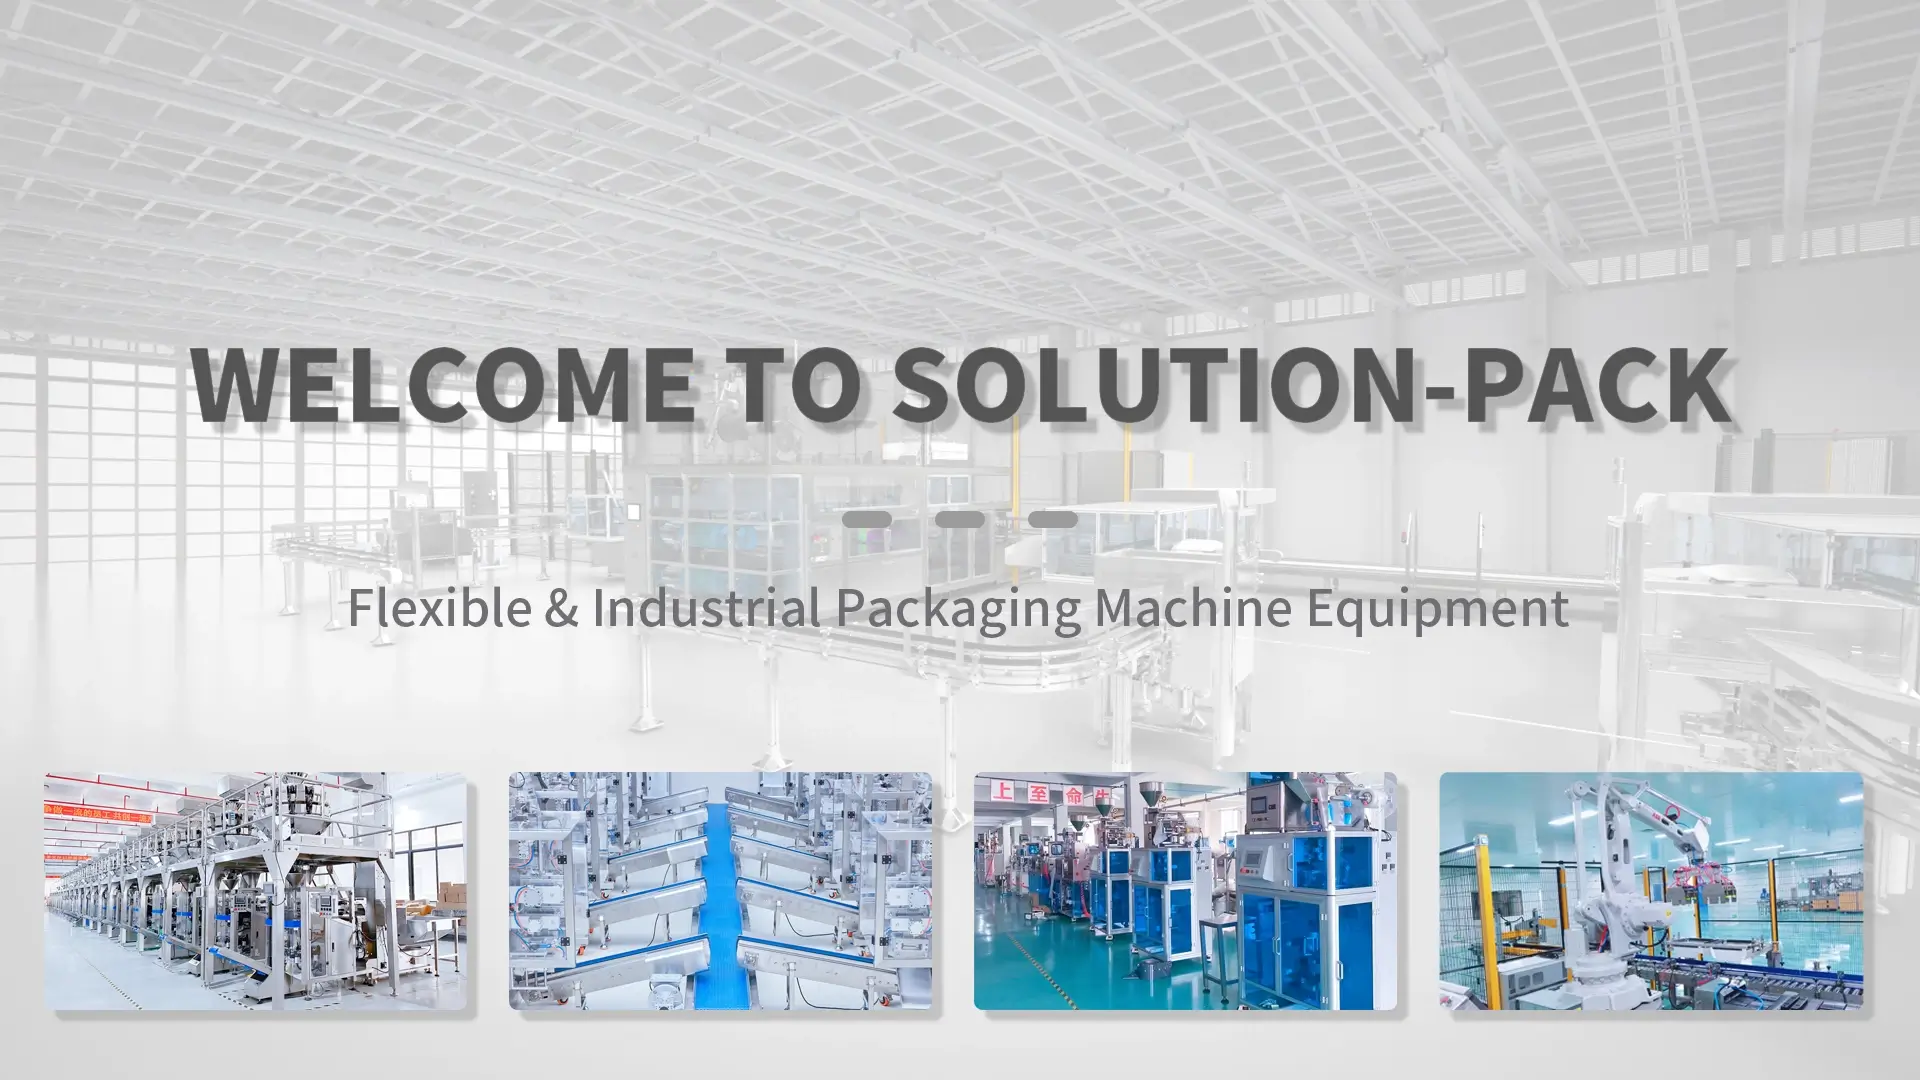 SOLUTION-PACK PACKAGING MACHINE EQUIPMENT PRODUCT CENTER HEADING BANNER PICTURE